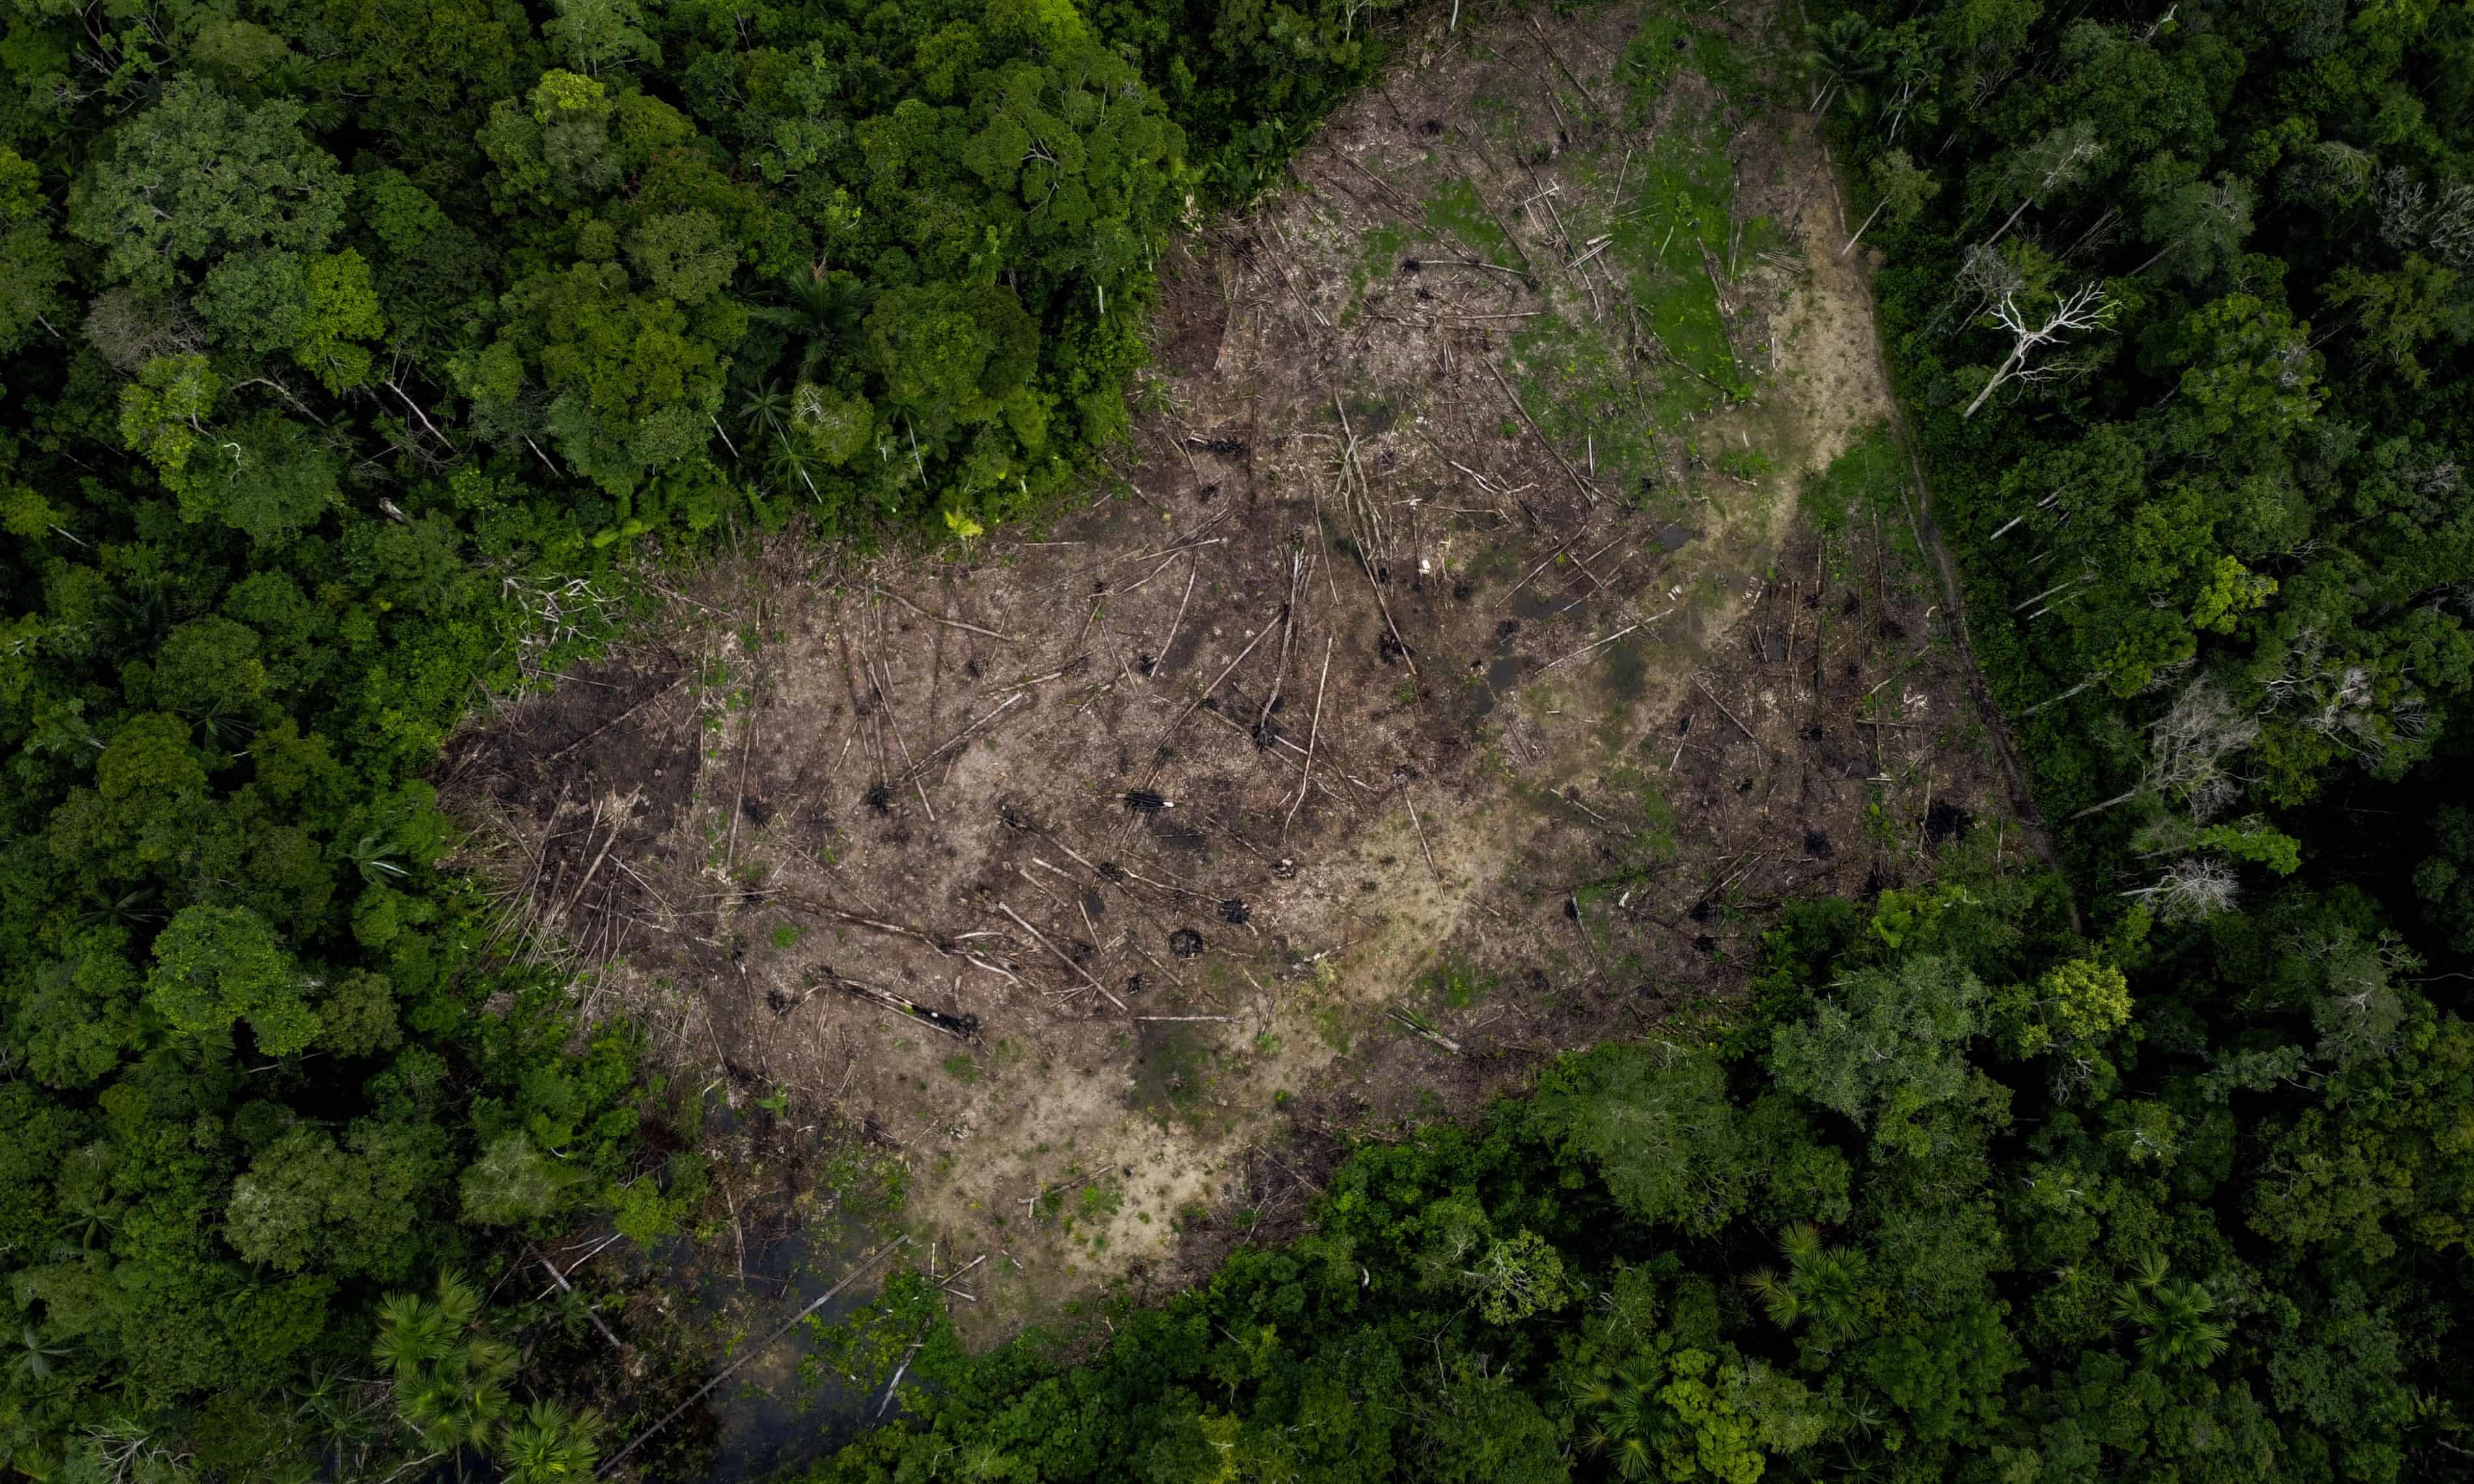 Colombian Amazon deforestation surges as armed groups tighten grip (theguardian.com)